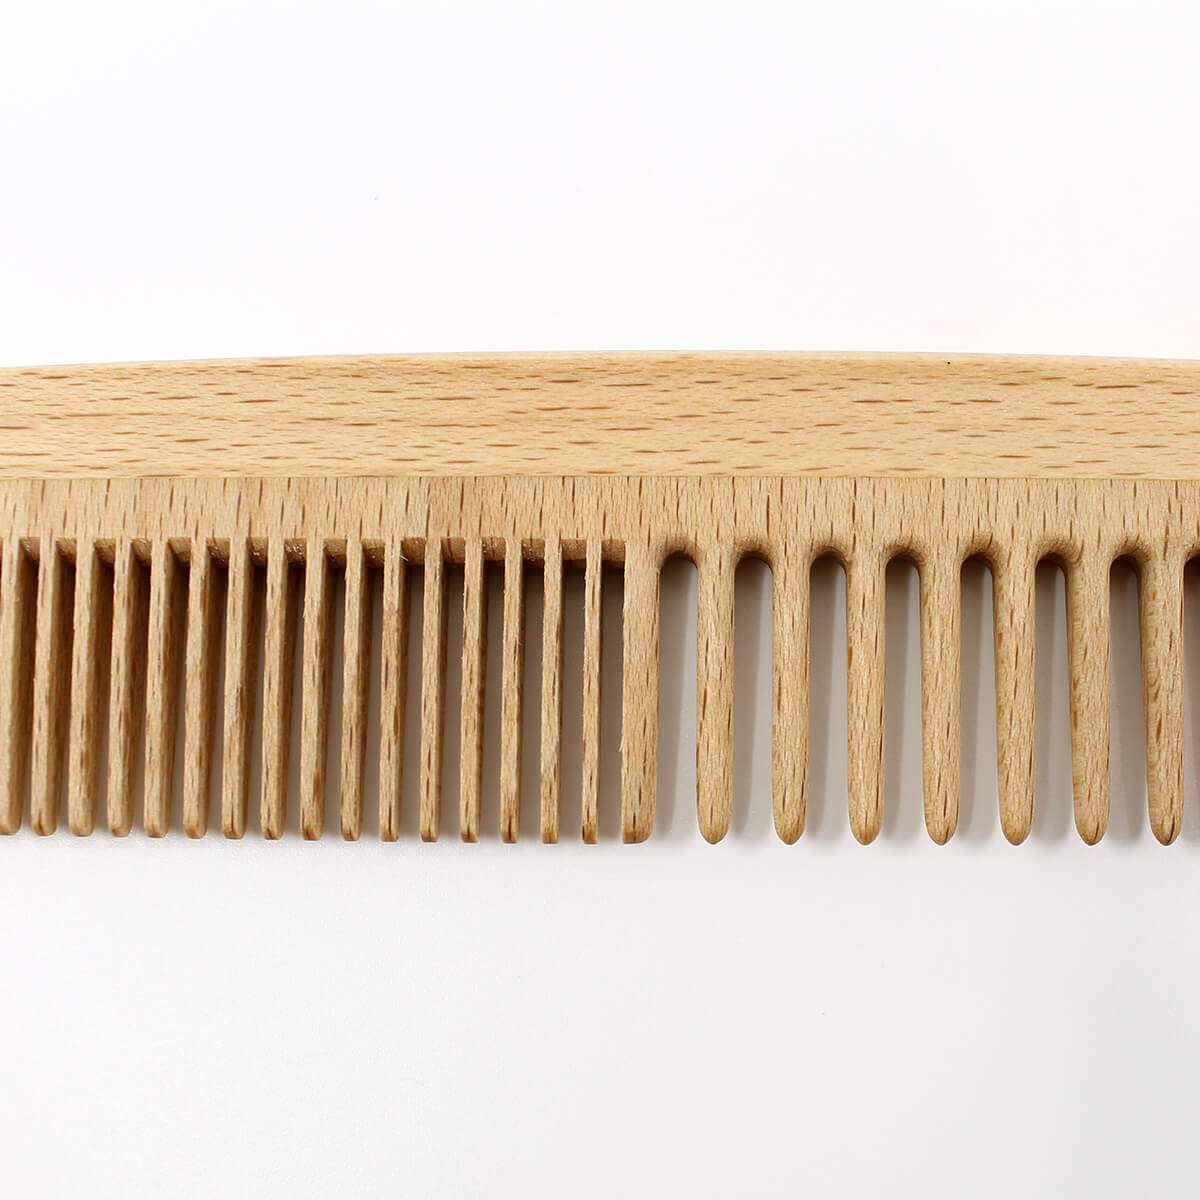 wide/fine tooth comb, wooden comb